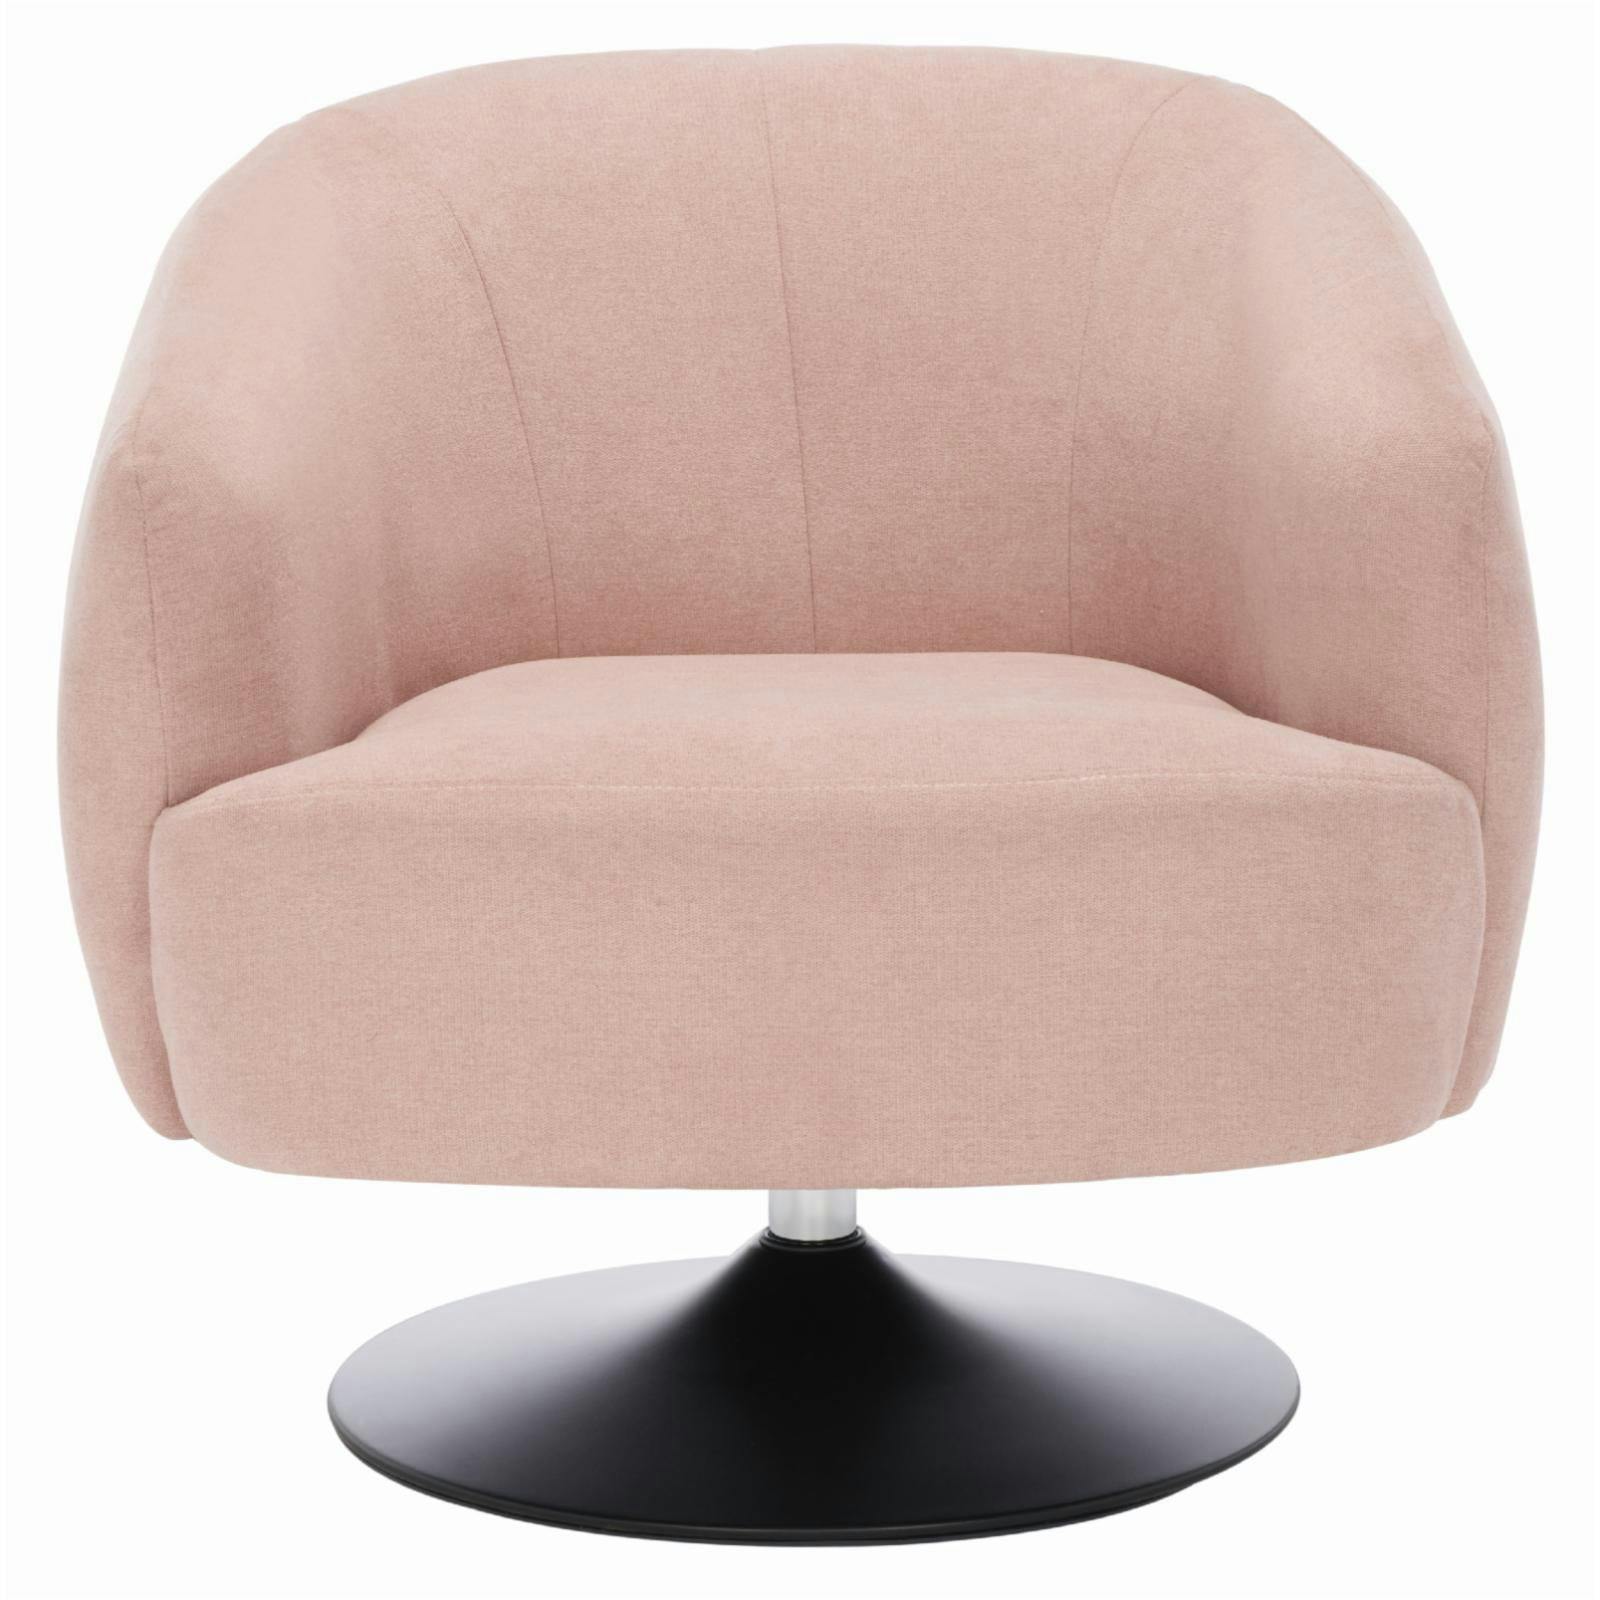 Blush Velvet Swivel Barrel Accent Chair with Wood Detailing